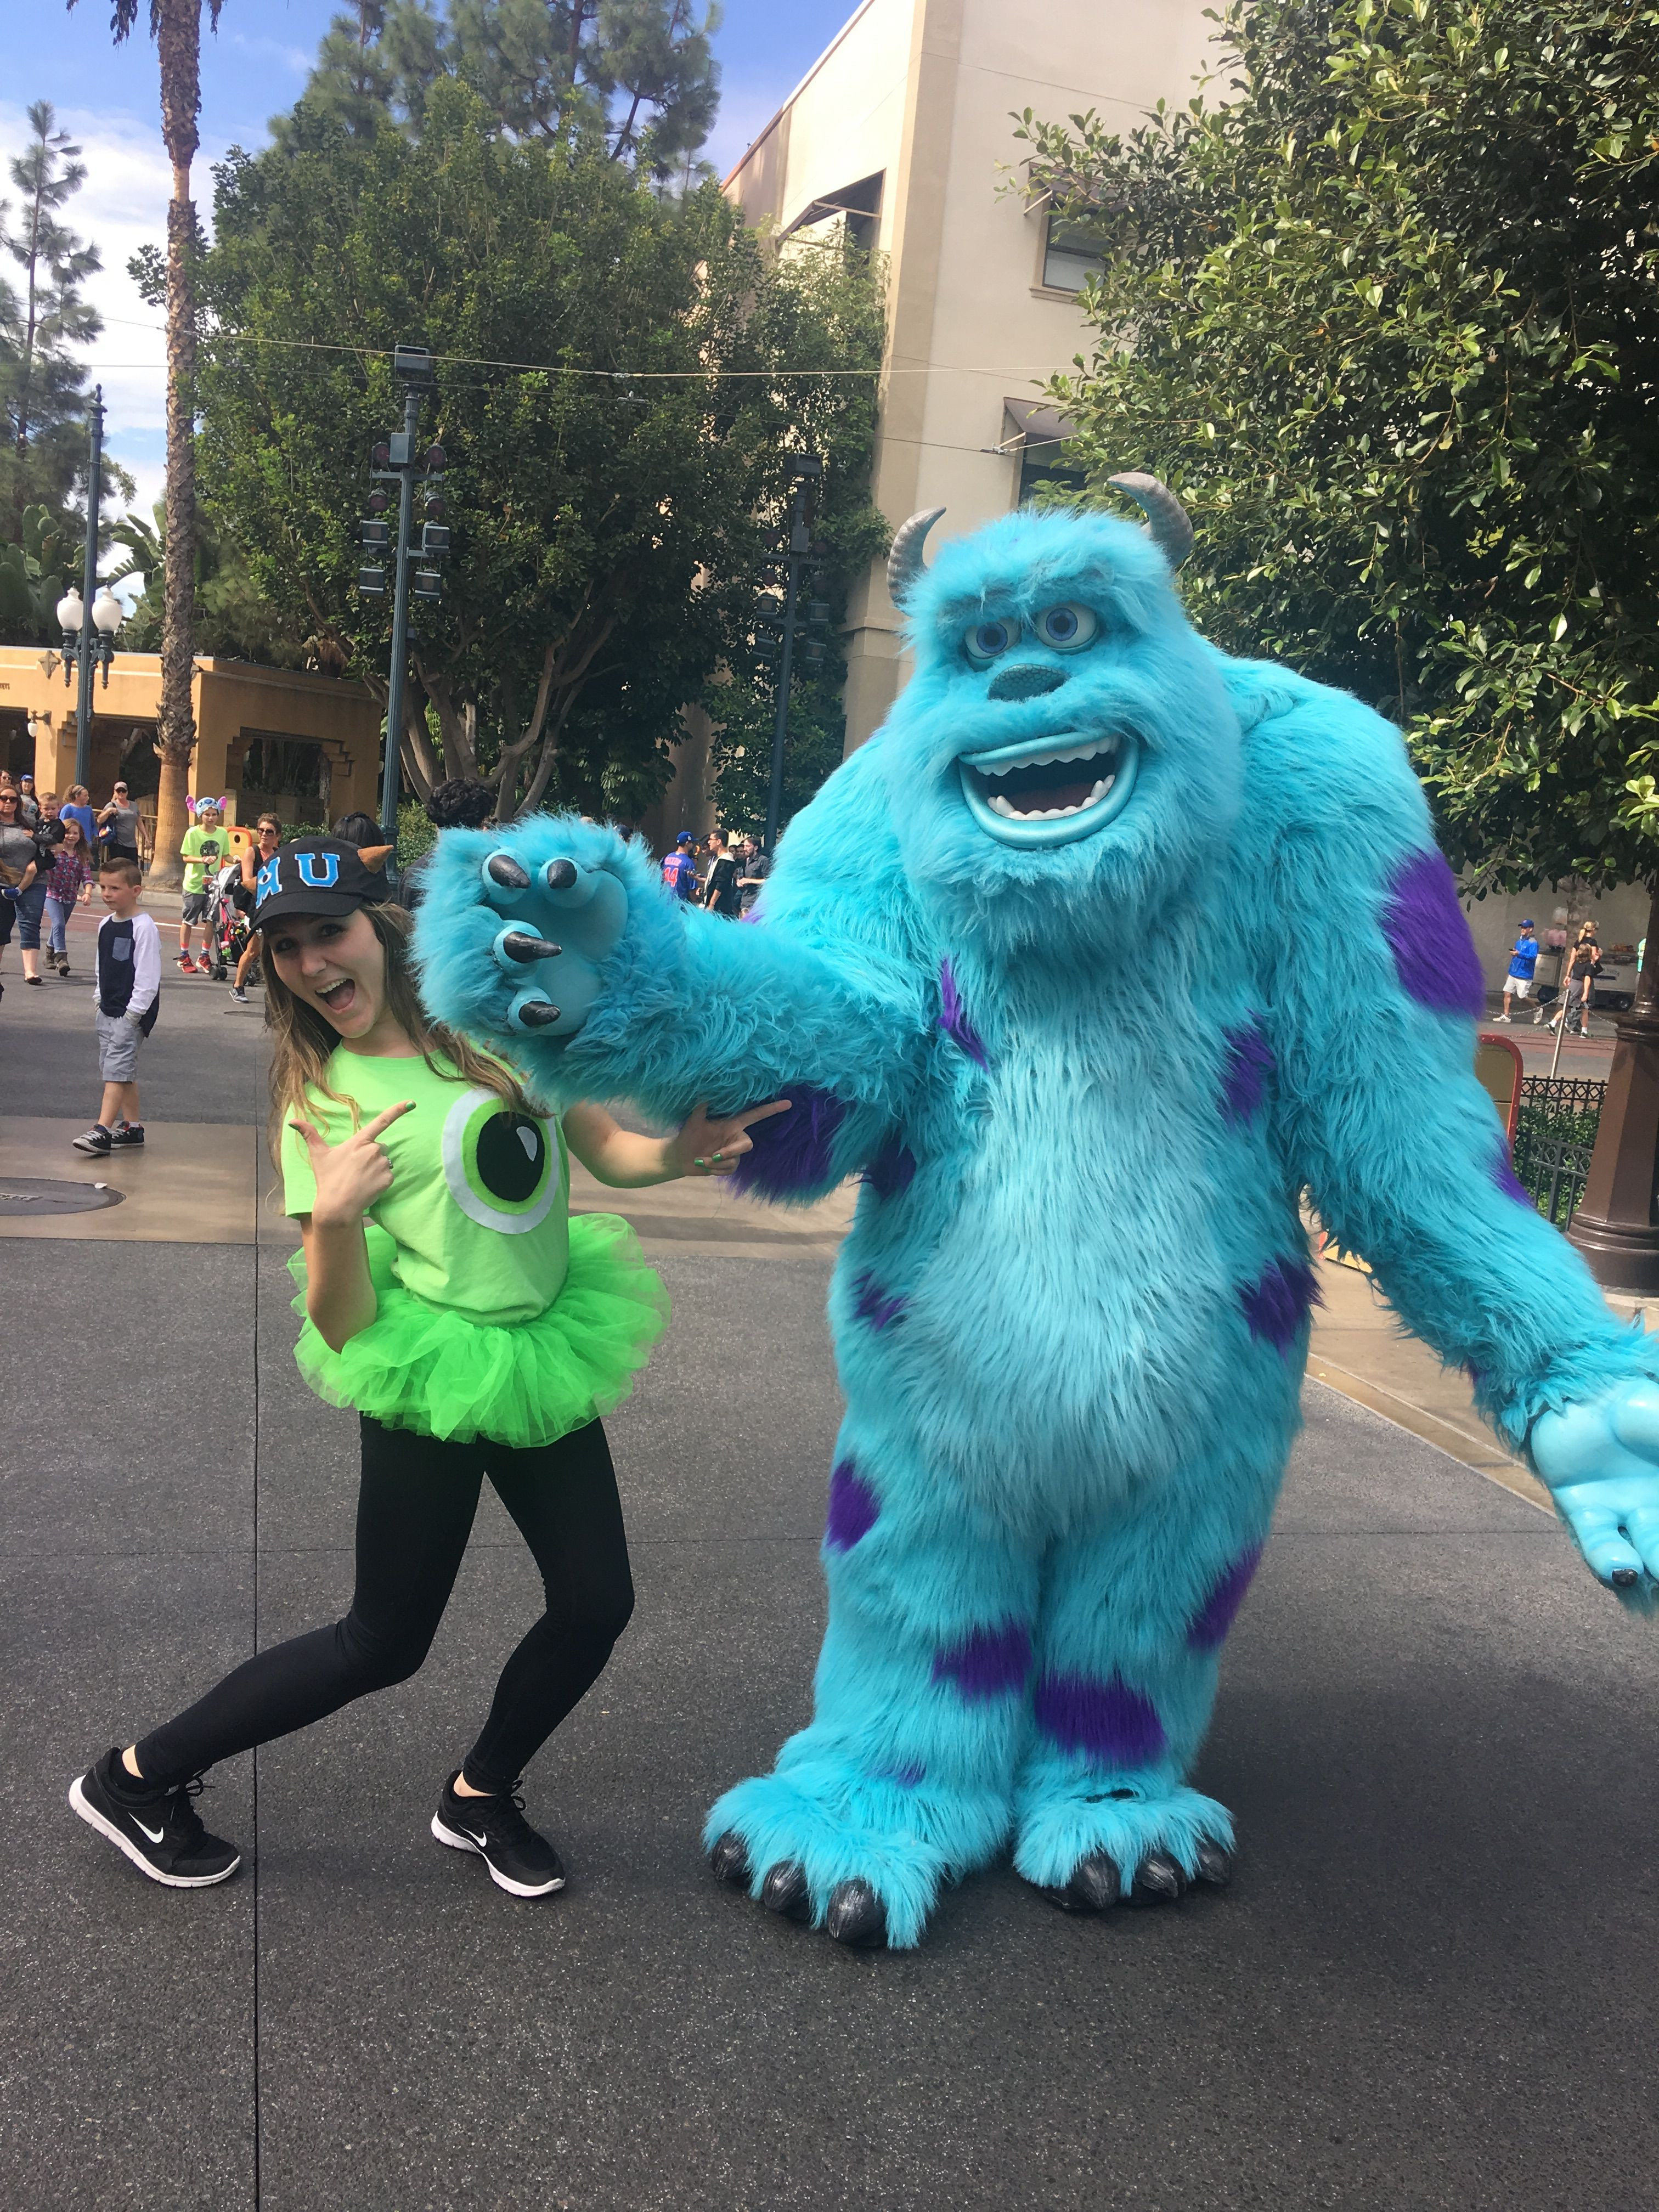 Sully Monsters Inc Costume DIY
 Mike and Sully costumes DIY Disney costume